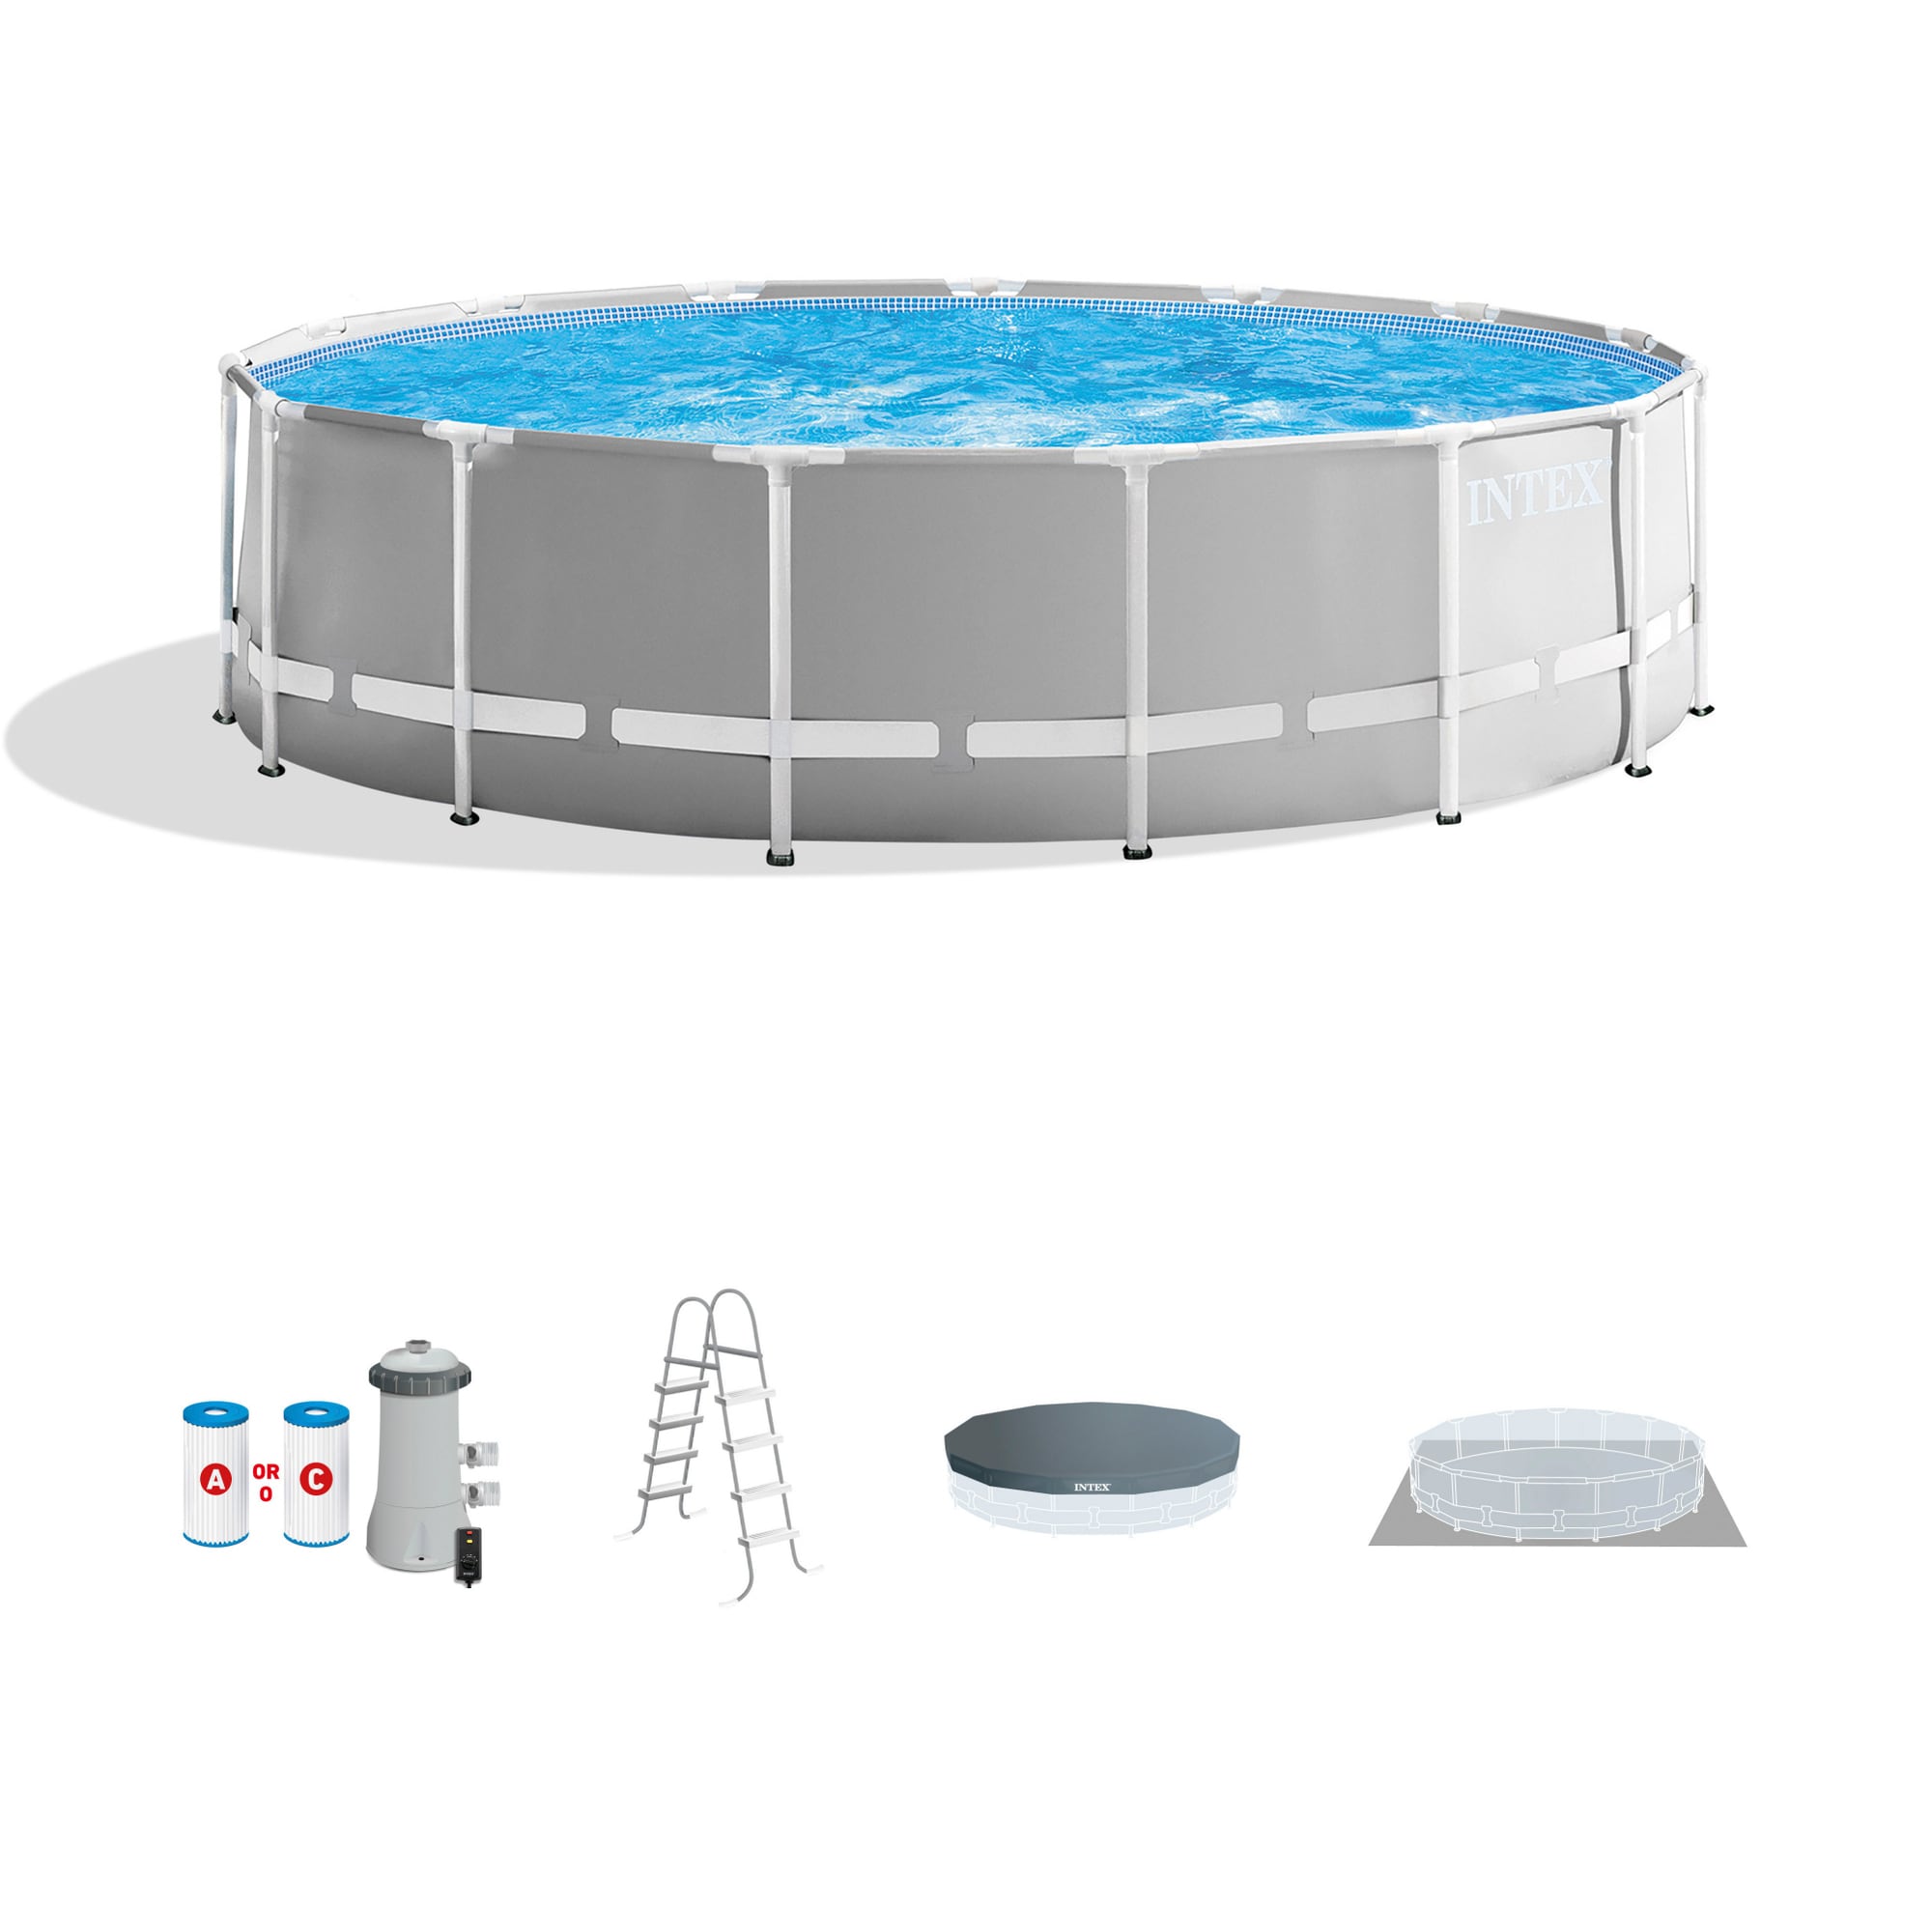 Intex 15 Ft X 15 Ft X 48 In Metal Frame Round Above Ground Pool With Filter Pumpground Cloth